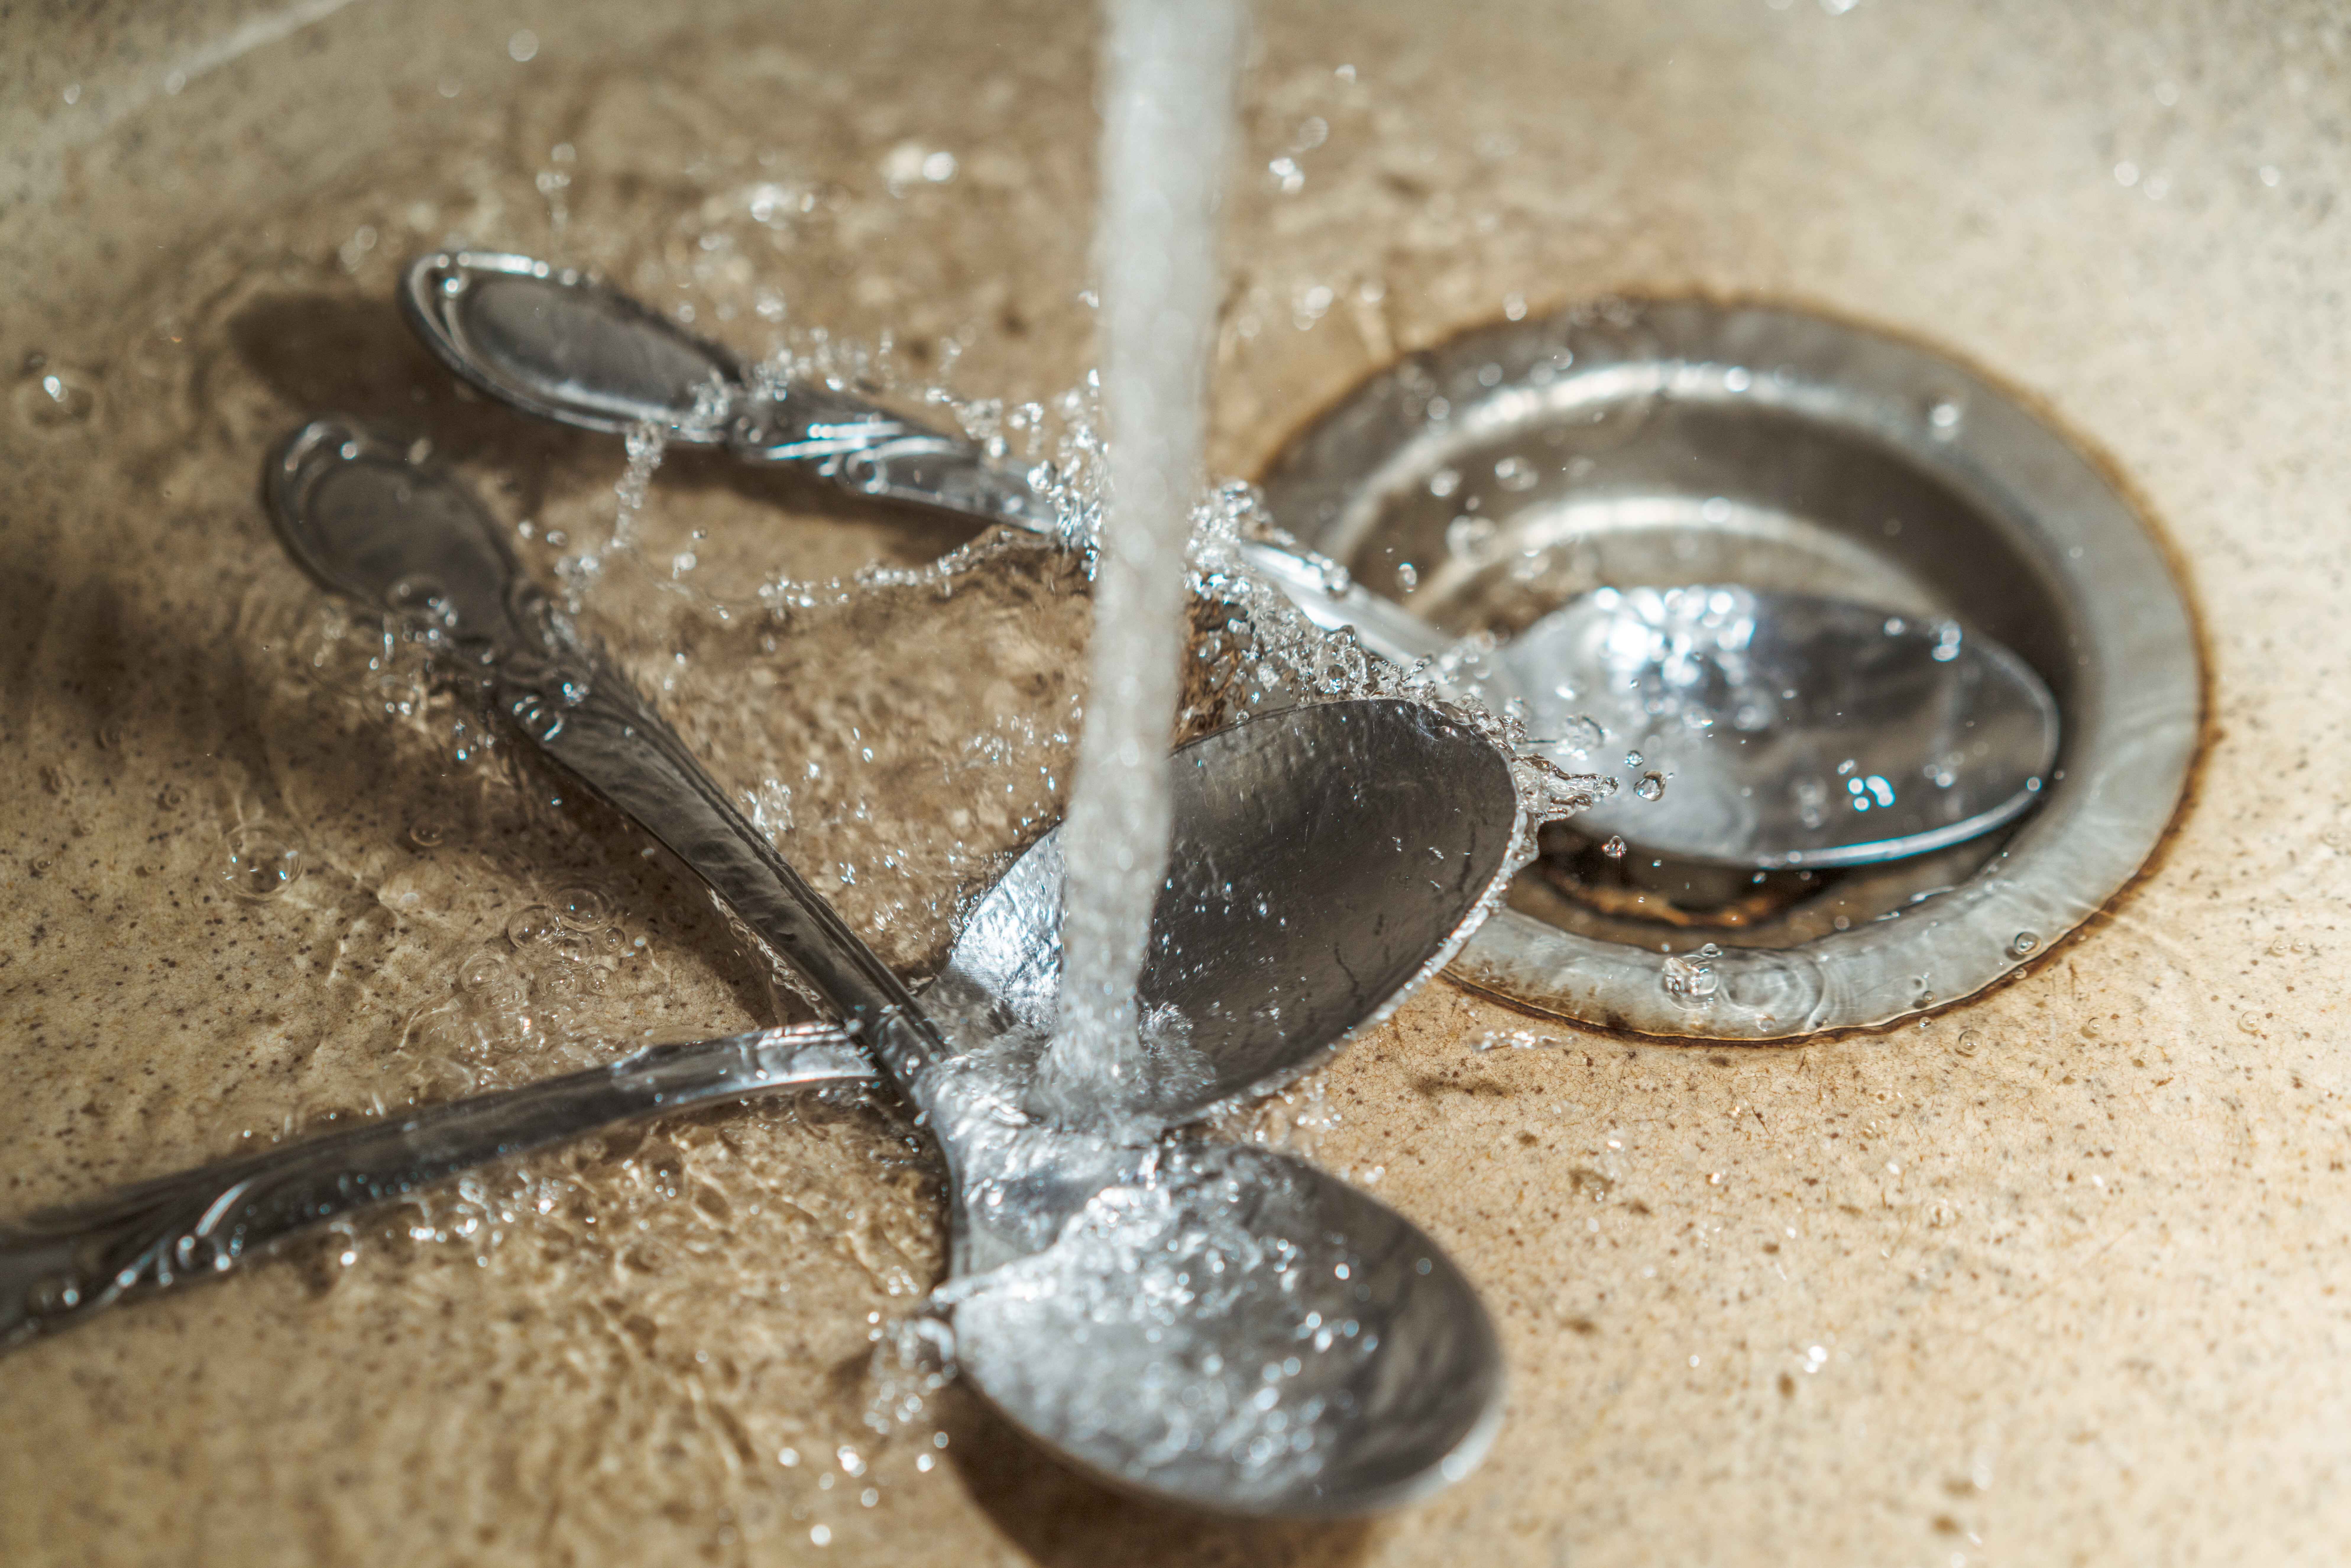 Should You Use Salt Down Your Drain To Clear Plumbing Clogs?